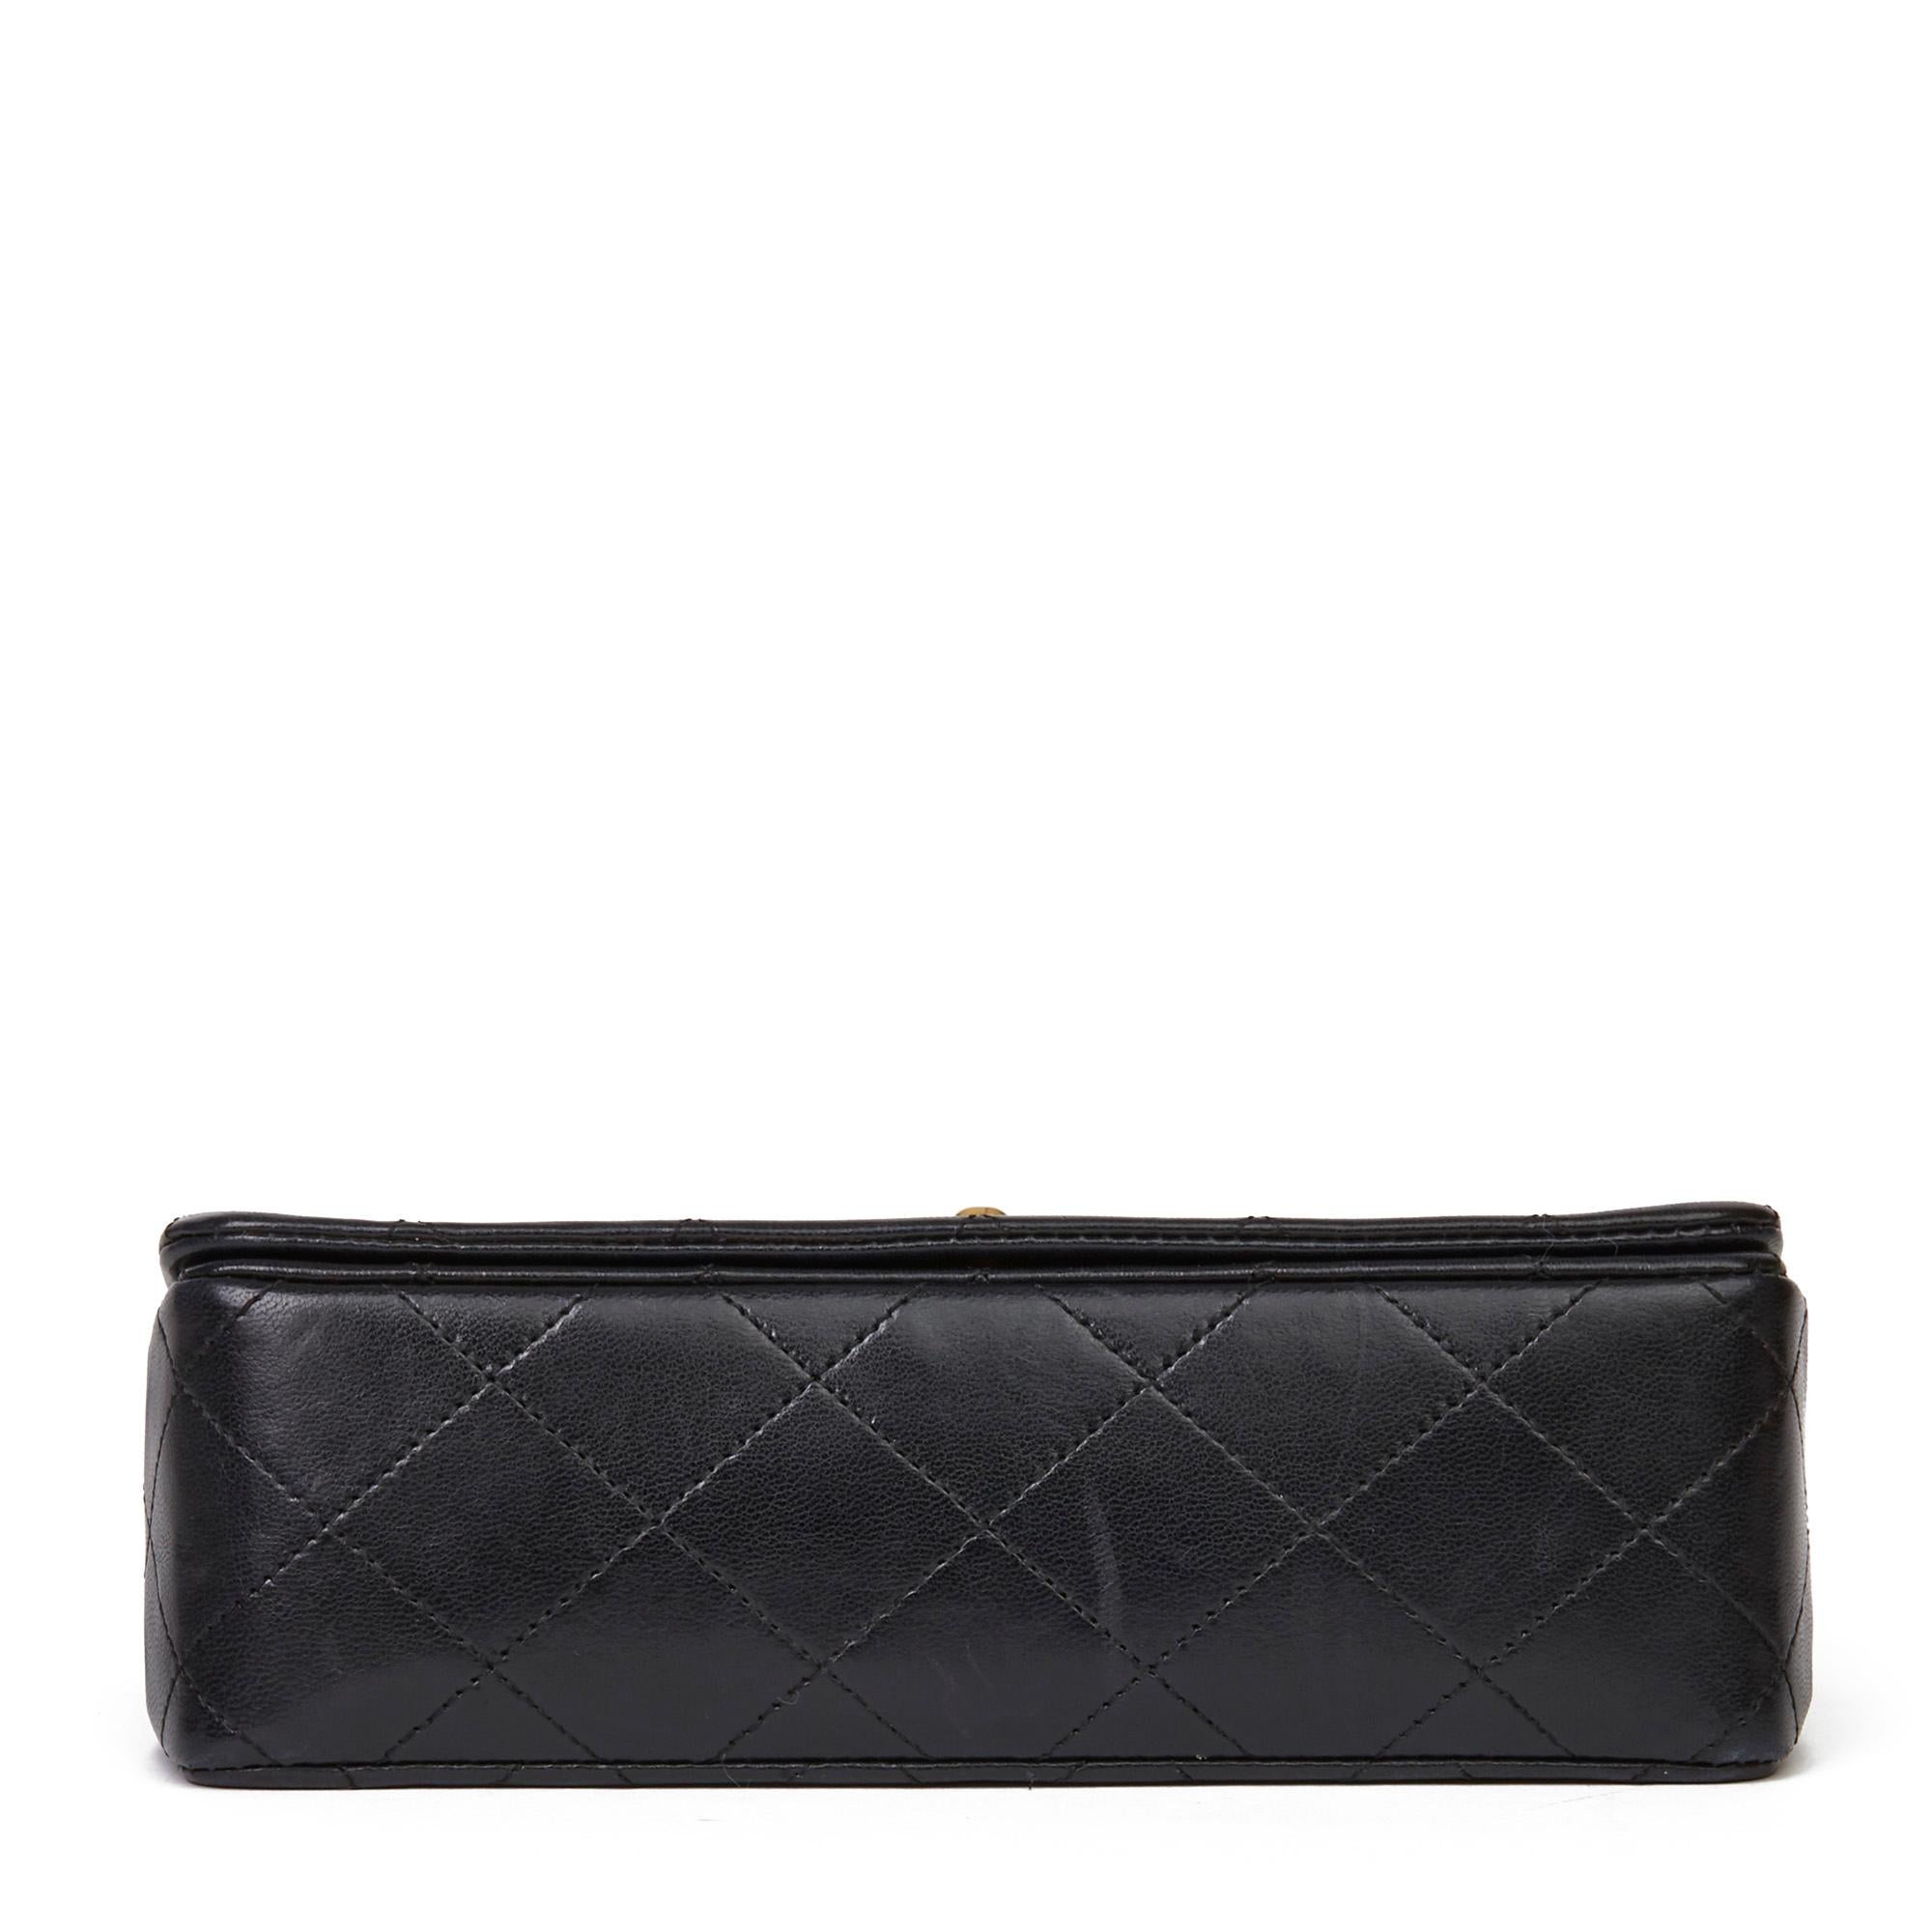 1994 Chanel Black Quilted Lambskin Vintage Mini Flap Bag  1